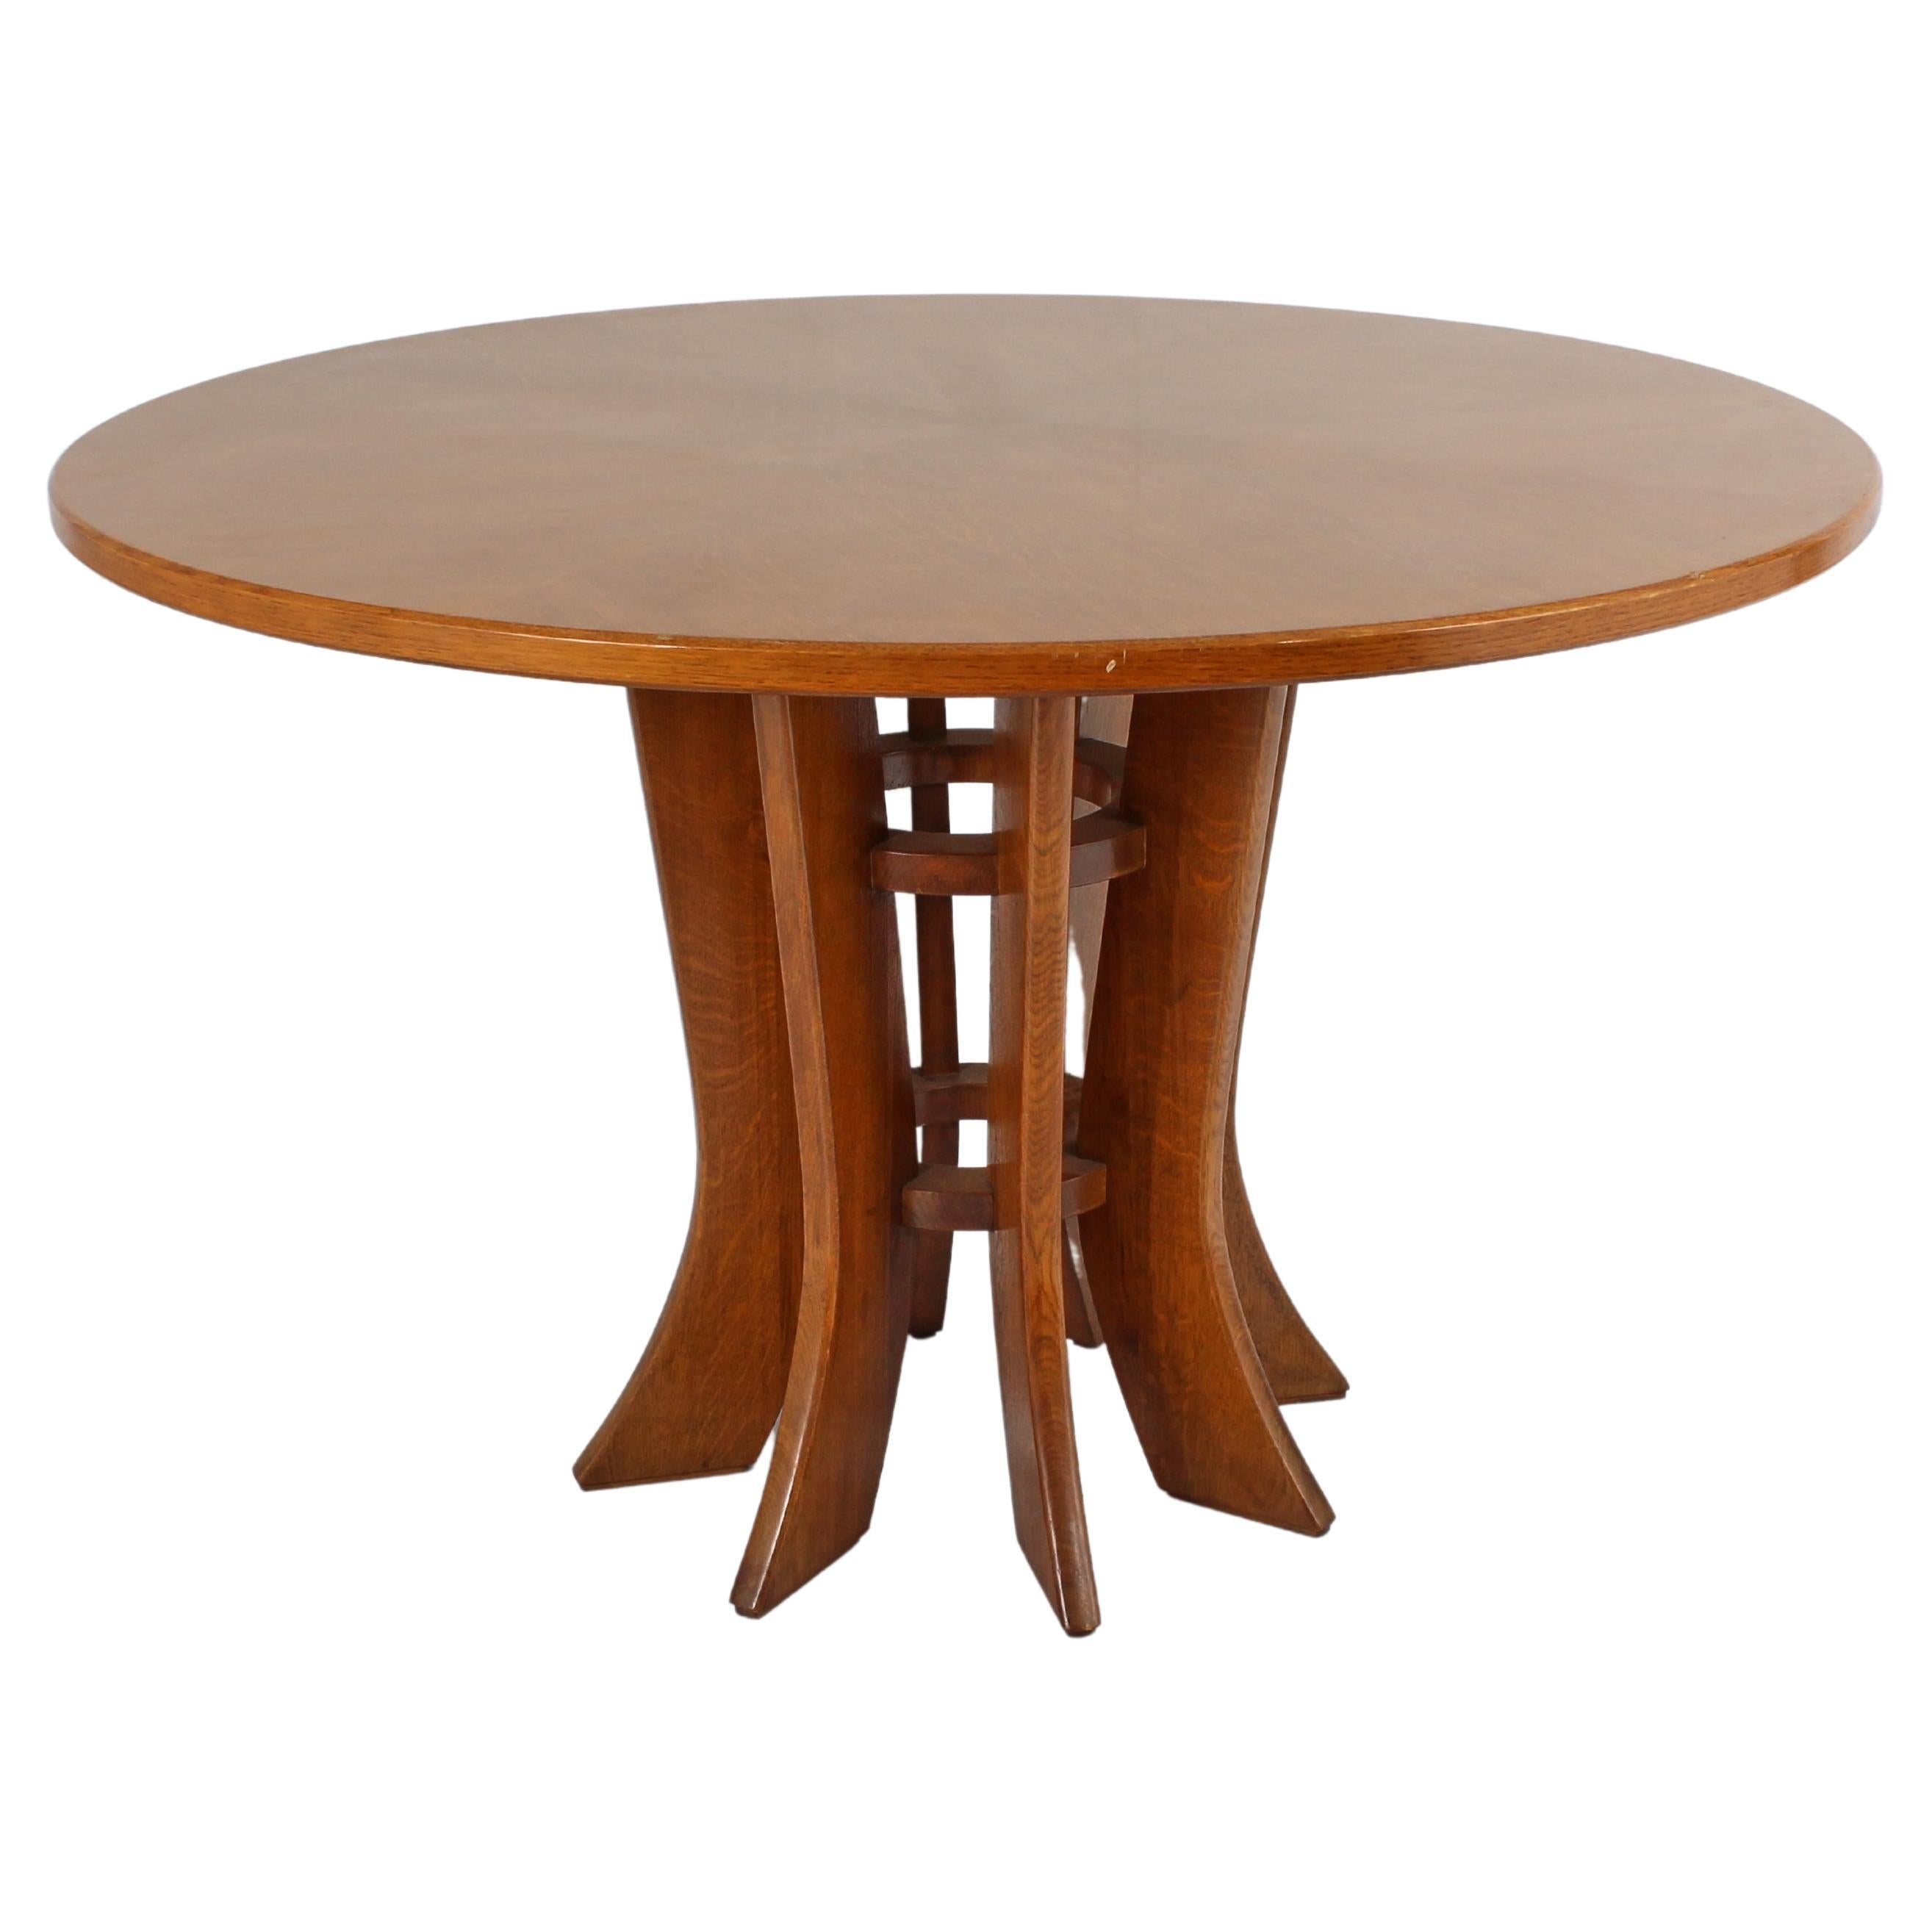 Mid-Century A. Mangiarotti style Wooden Round Diner Table 70s Italy For Sale